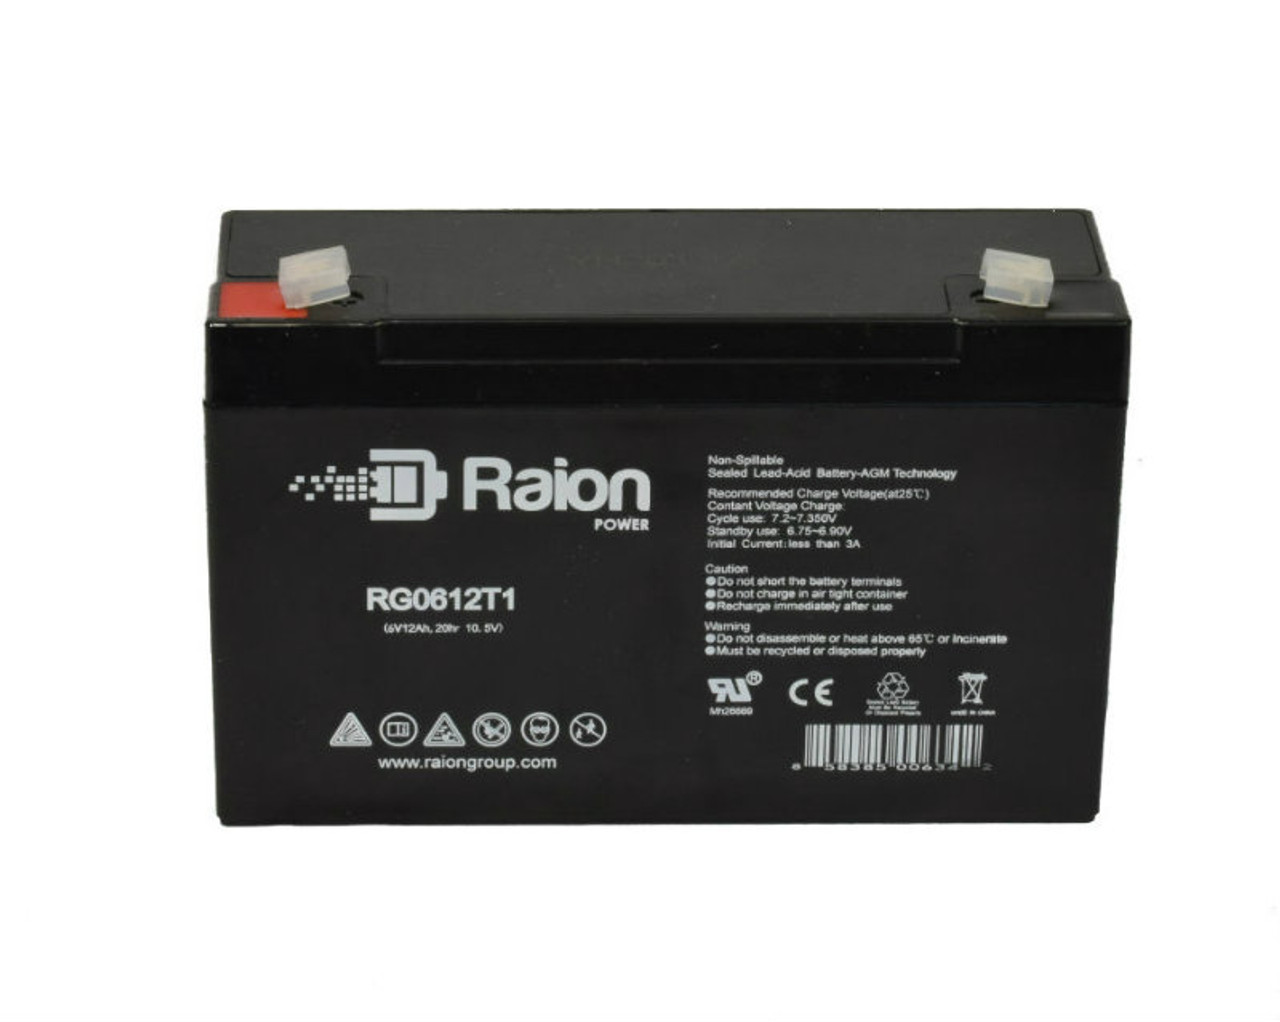 Raion Power RG06120T1 SLA Battery for Baxter Healthcare 800 Series Infusion Pump